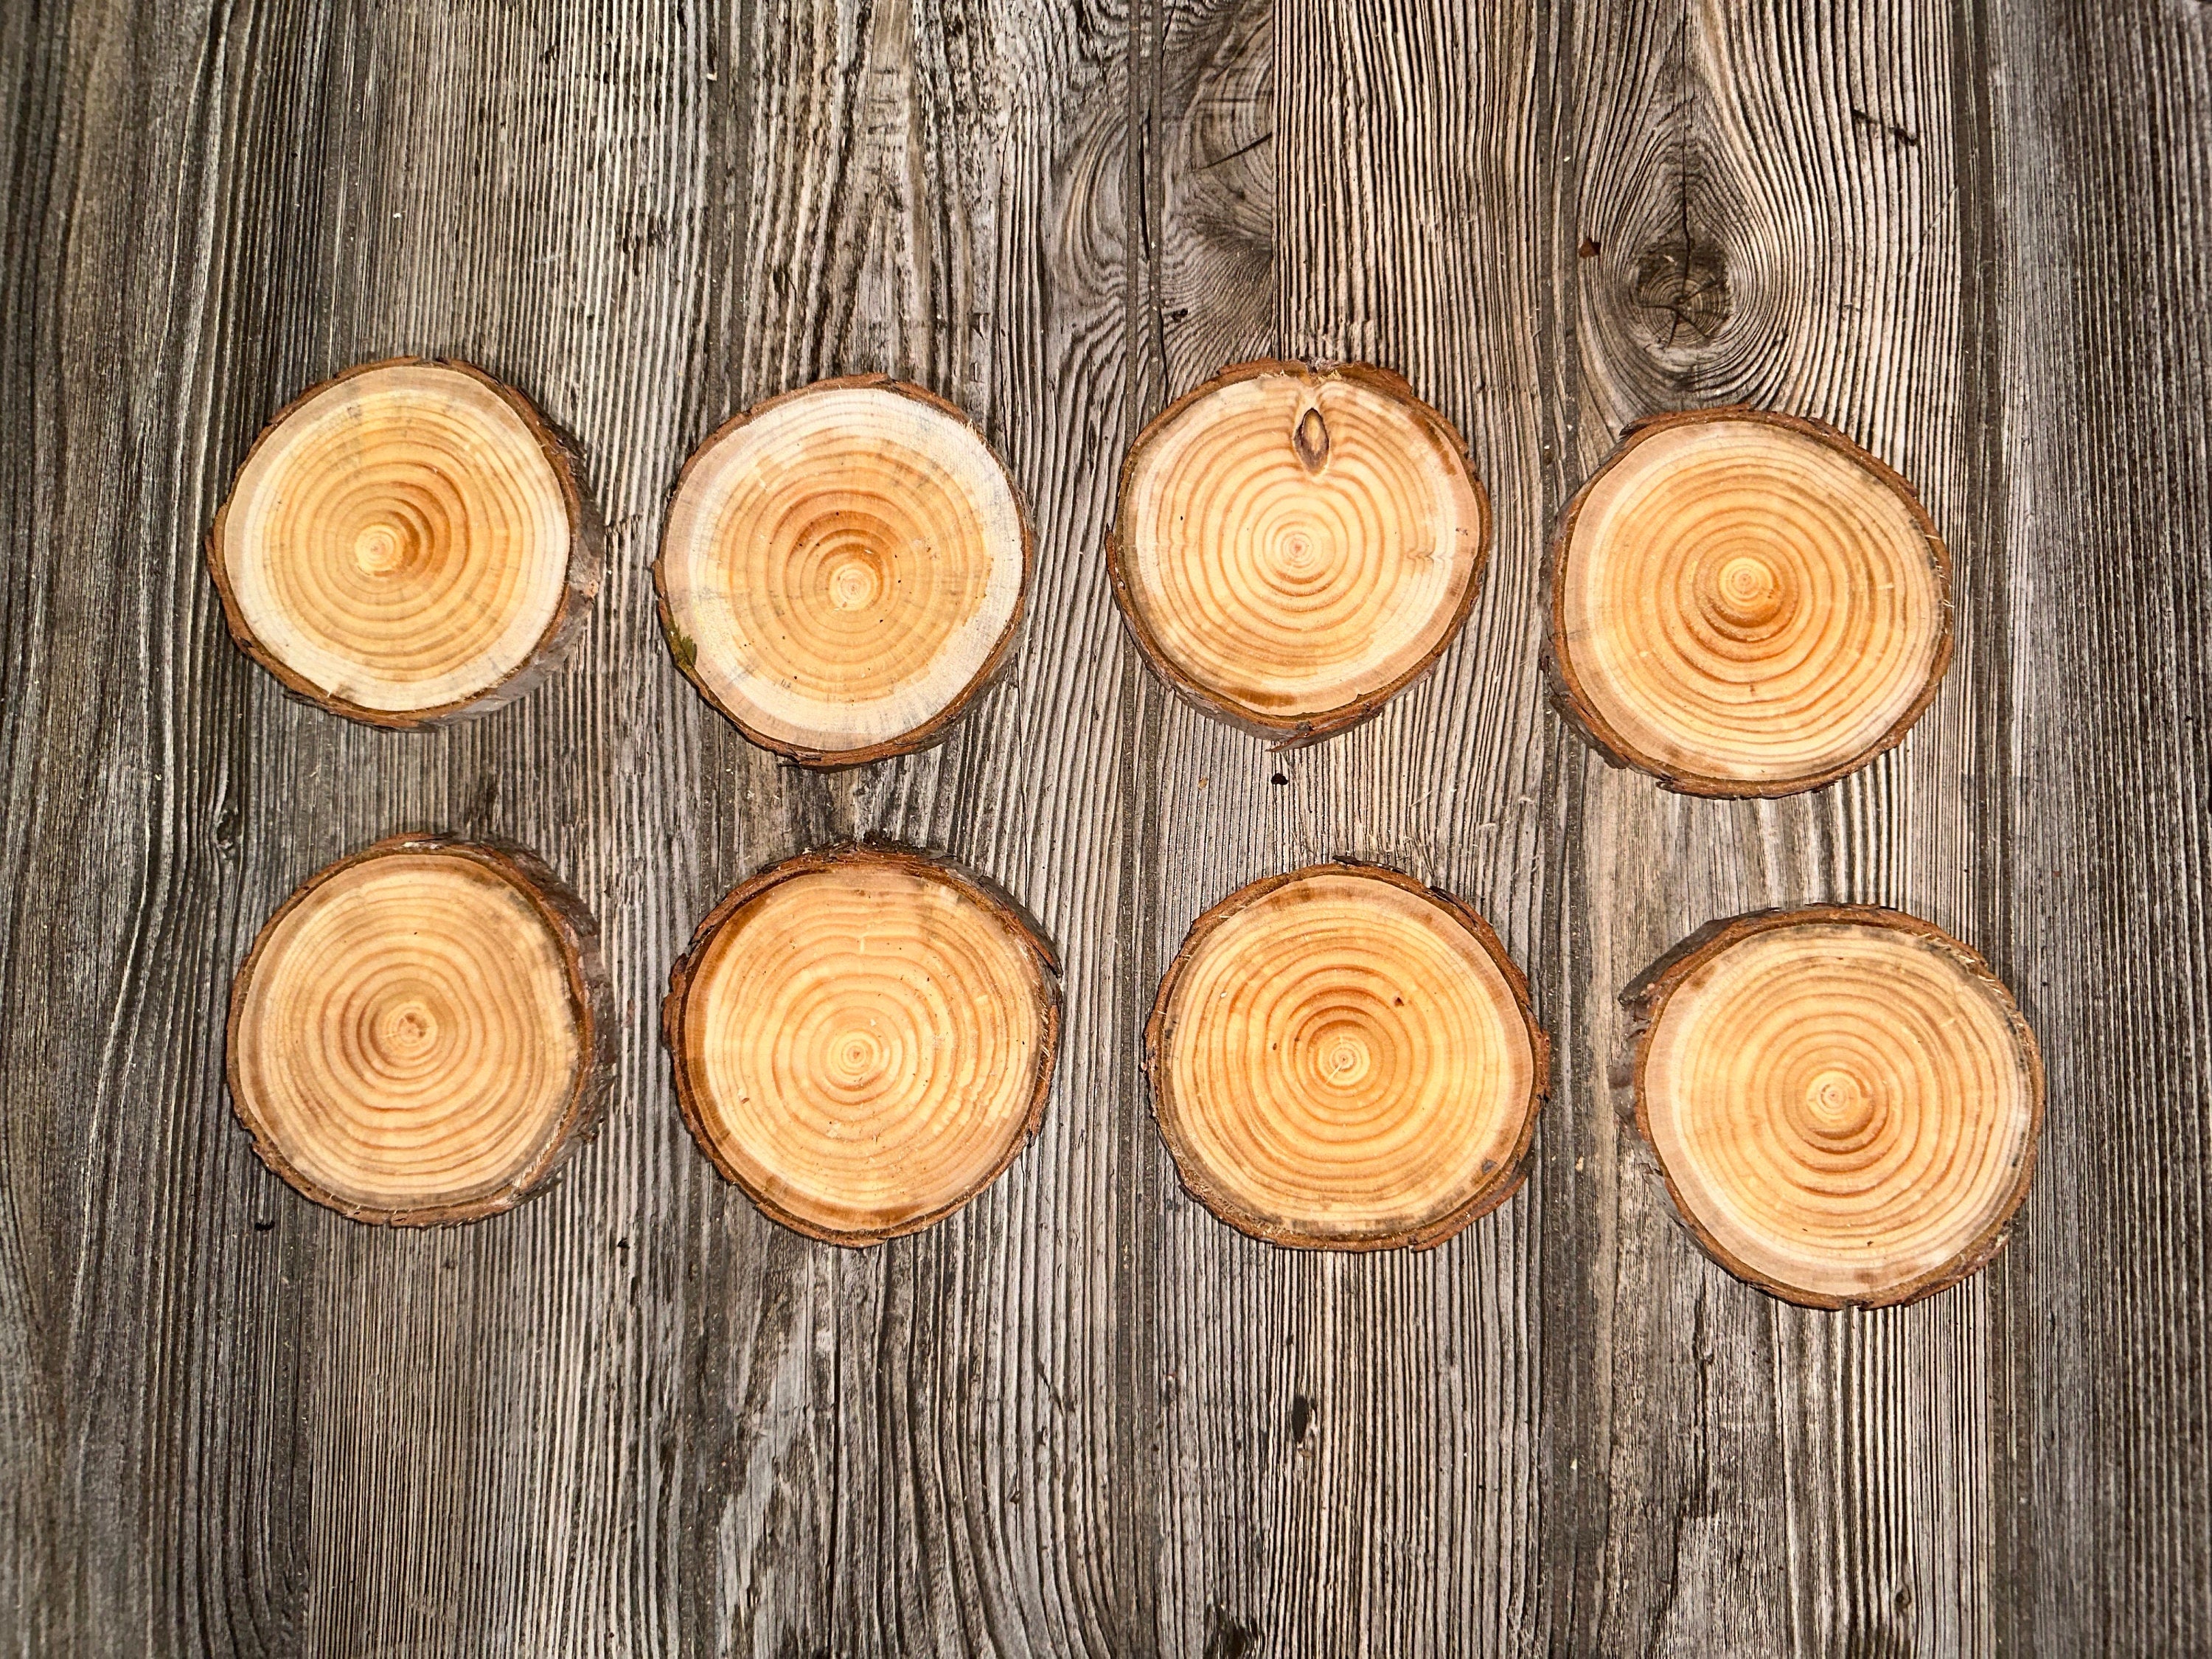 Red Pine Slices, Eight Count, Approximately 4-5 Inches Long by 4-5 Inches Wide and 1/2 Inch Tall